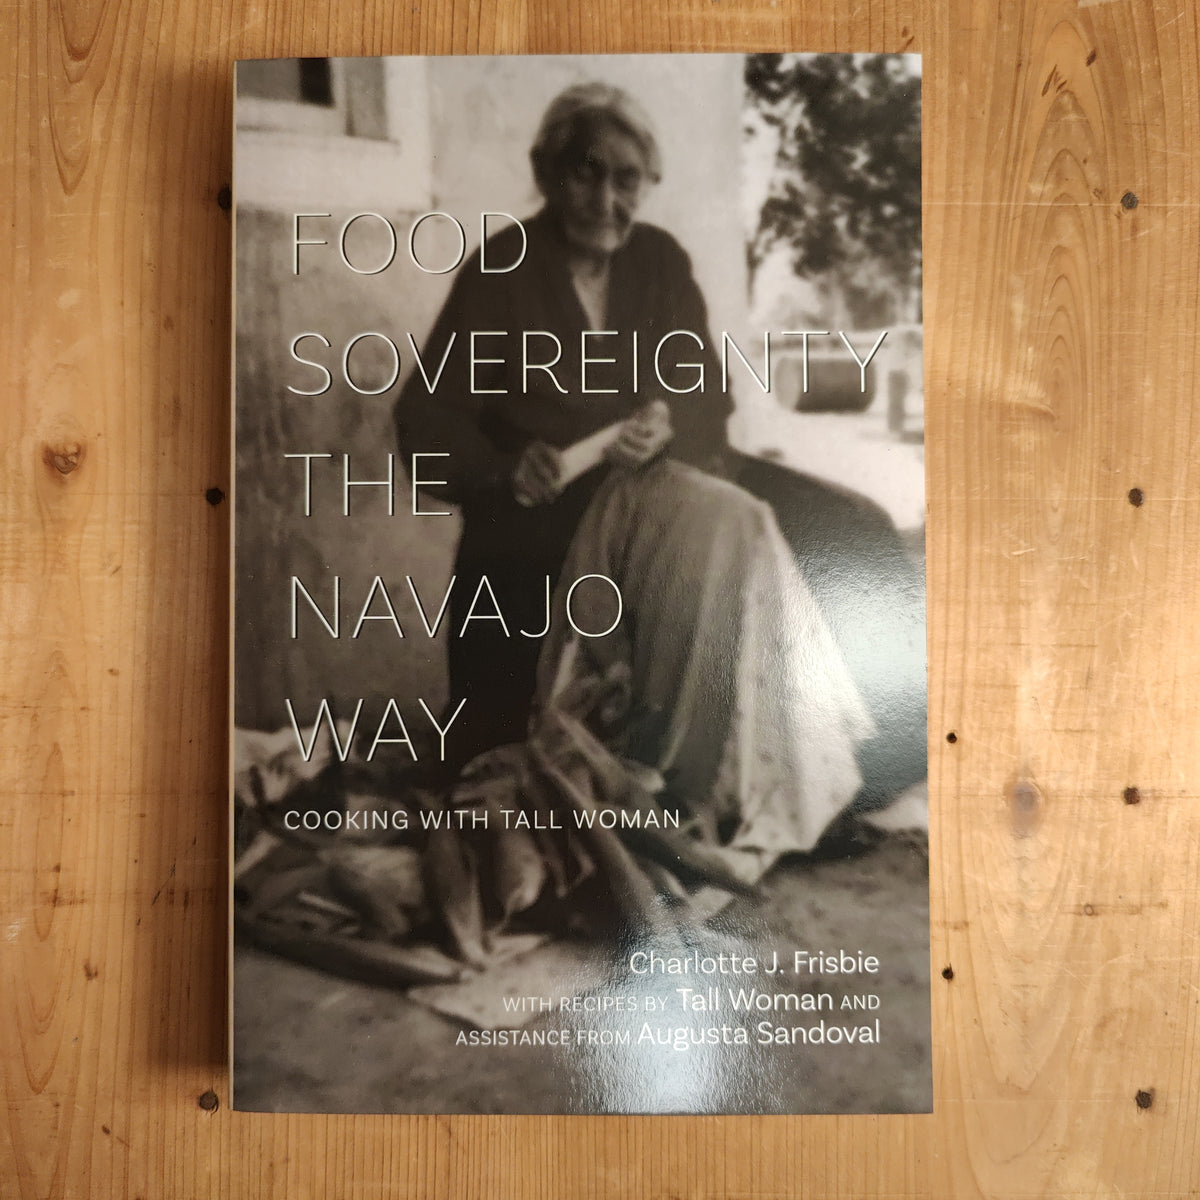 Food Sovereignty The Navajo Way: Cooking with Tall Woman - Charlotte Frisbie